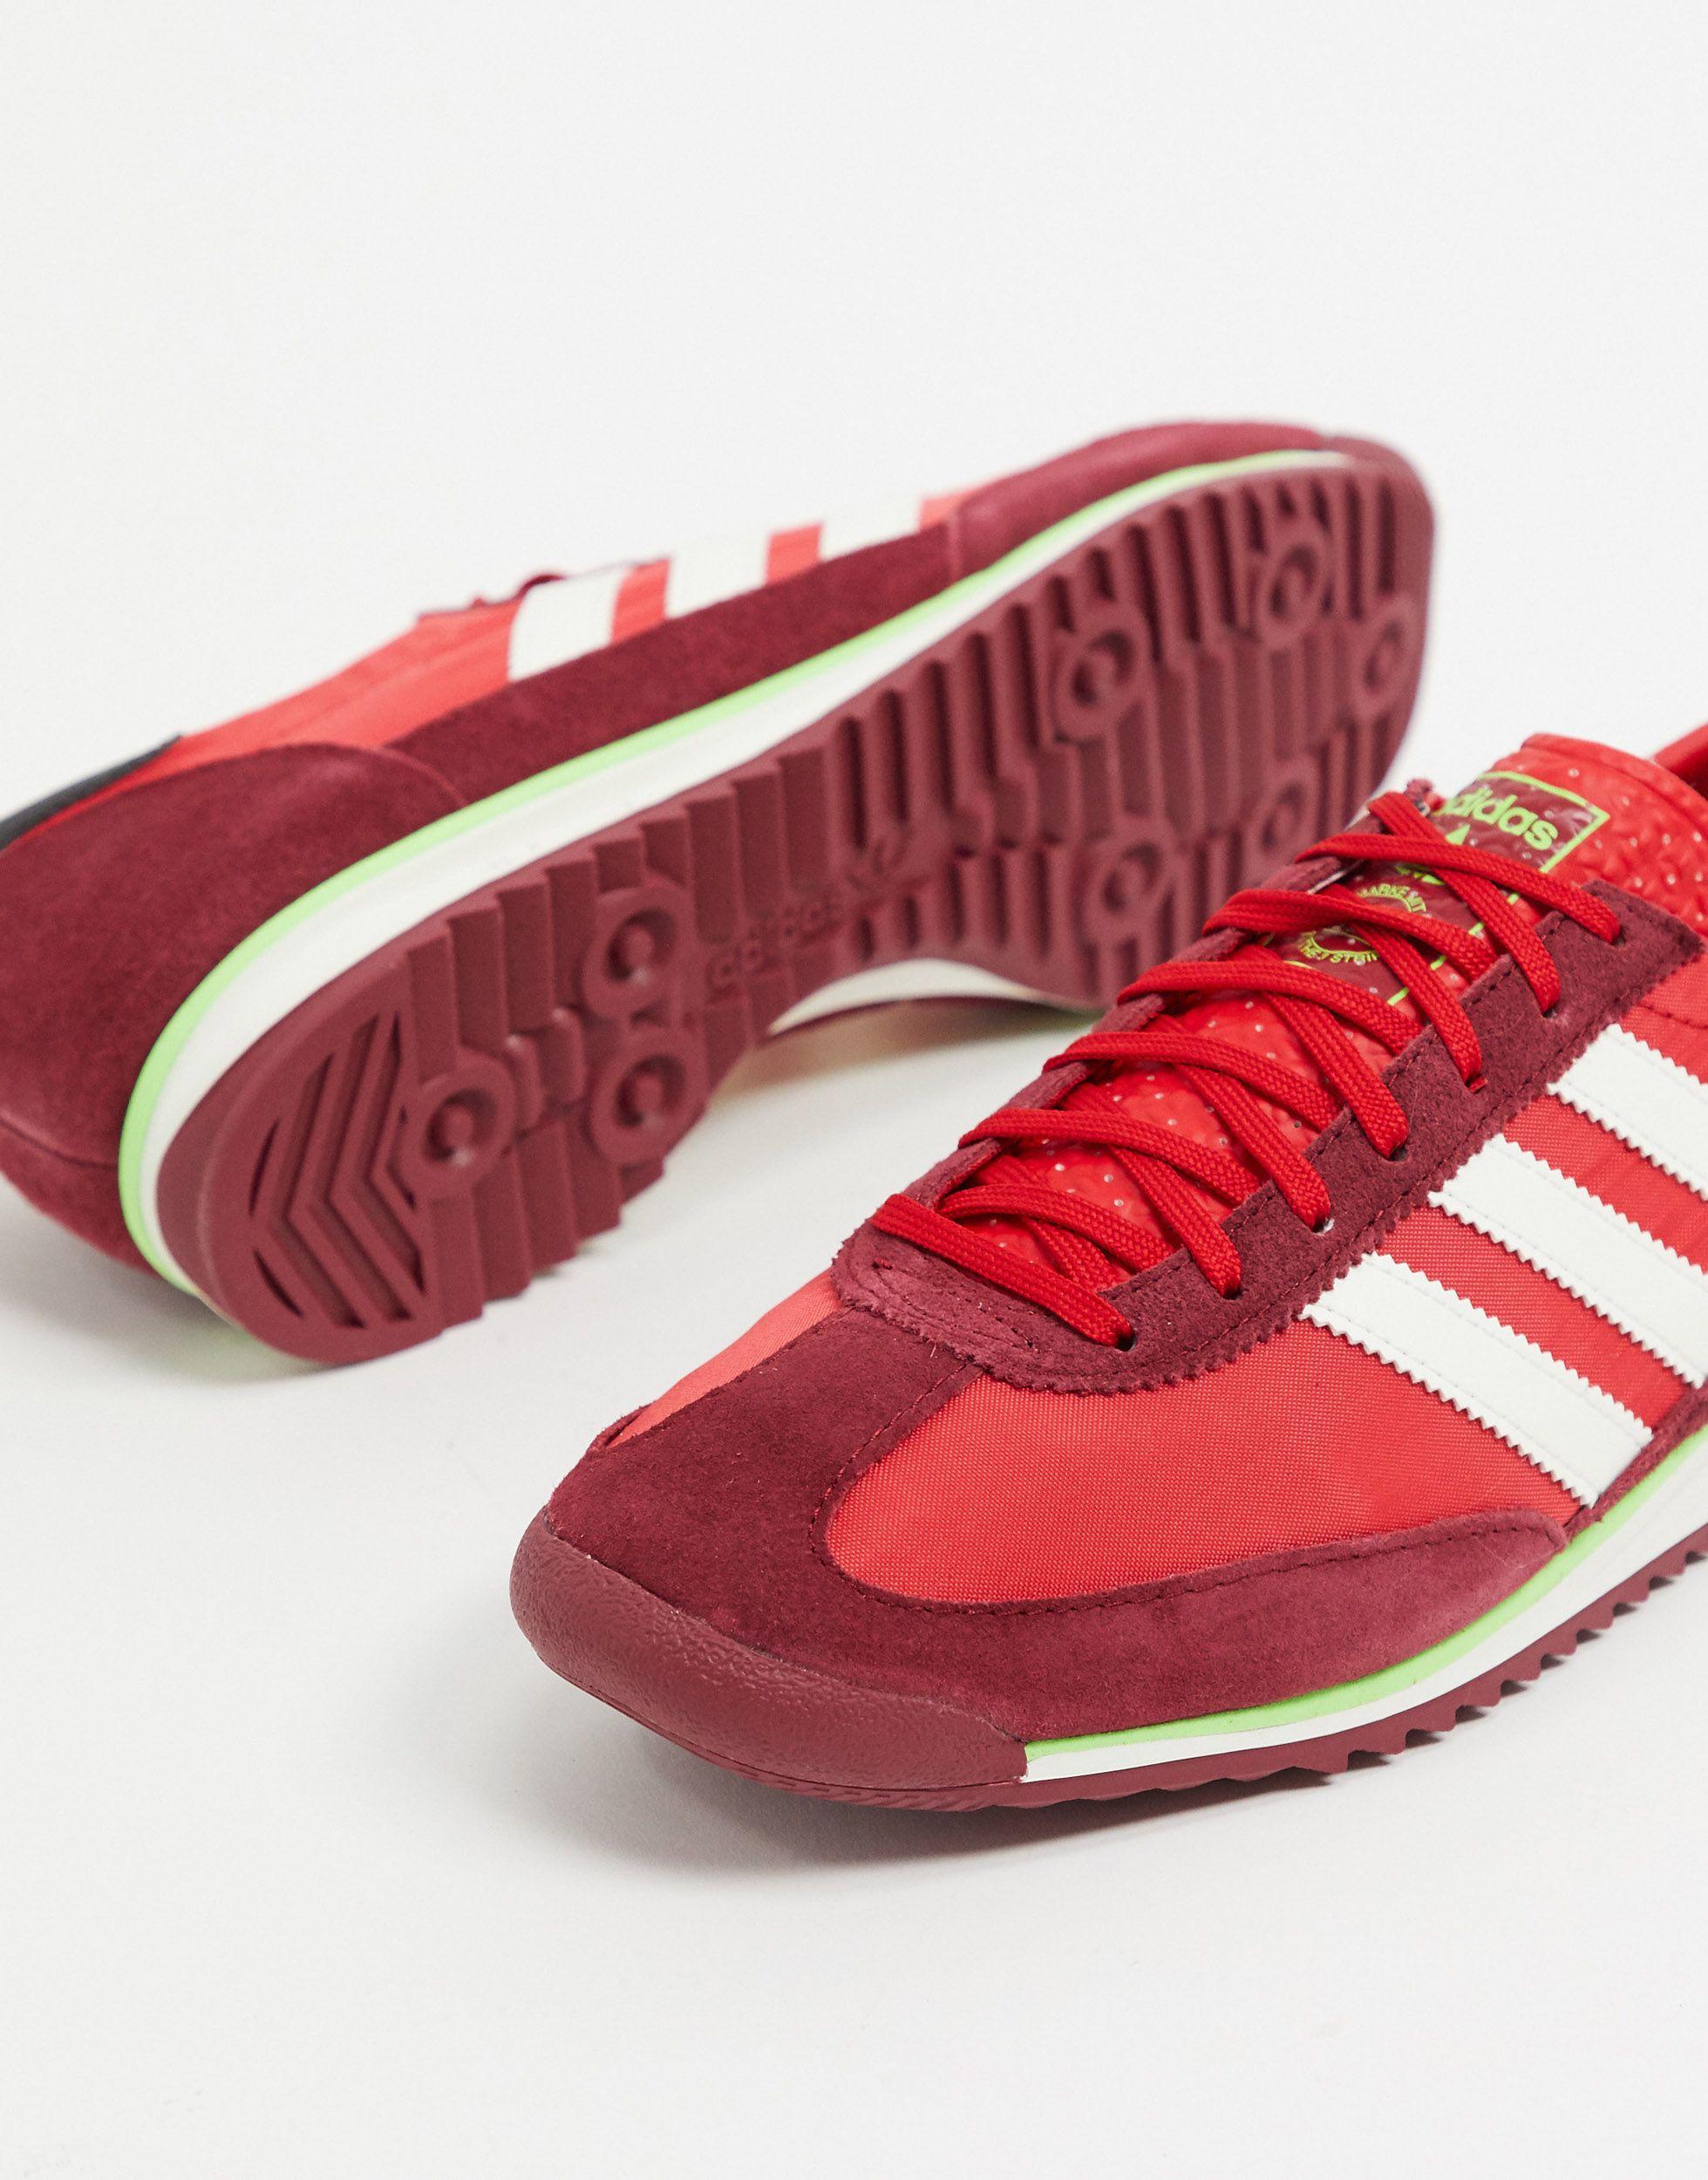 adidas Originals Sl 72 Trainers in Red for Men | Lyst